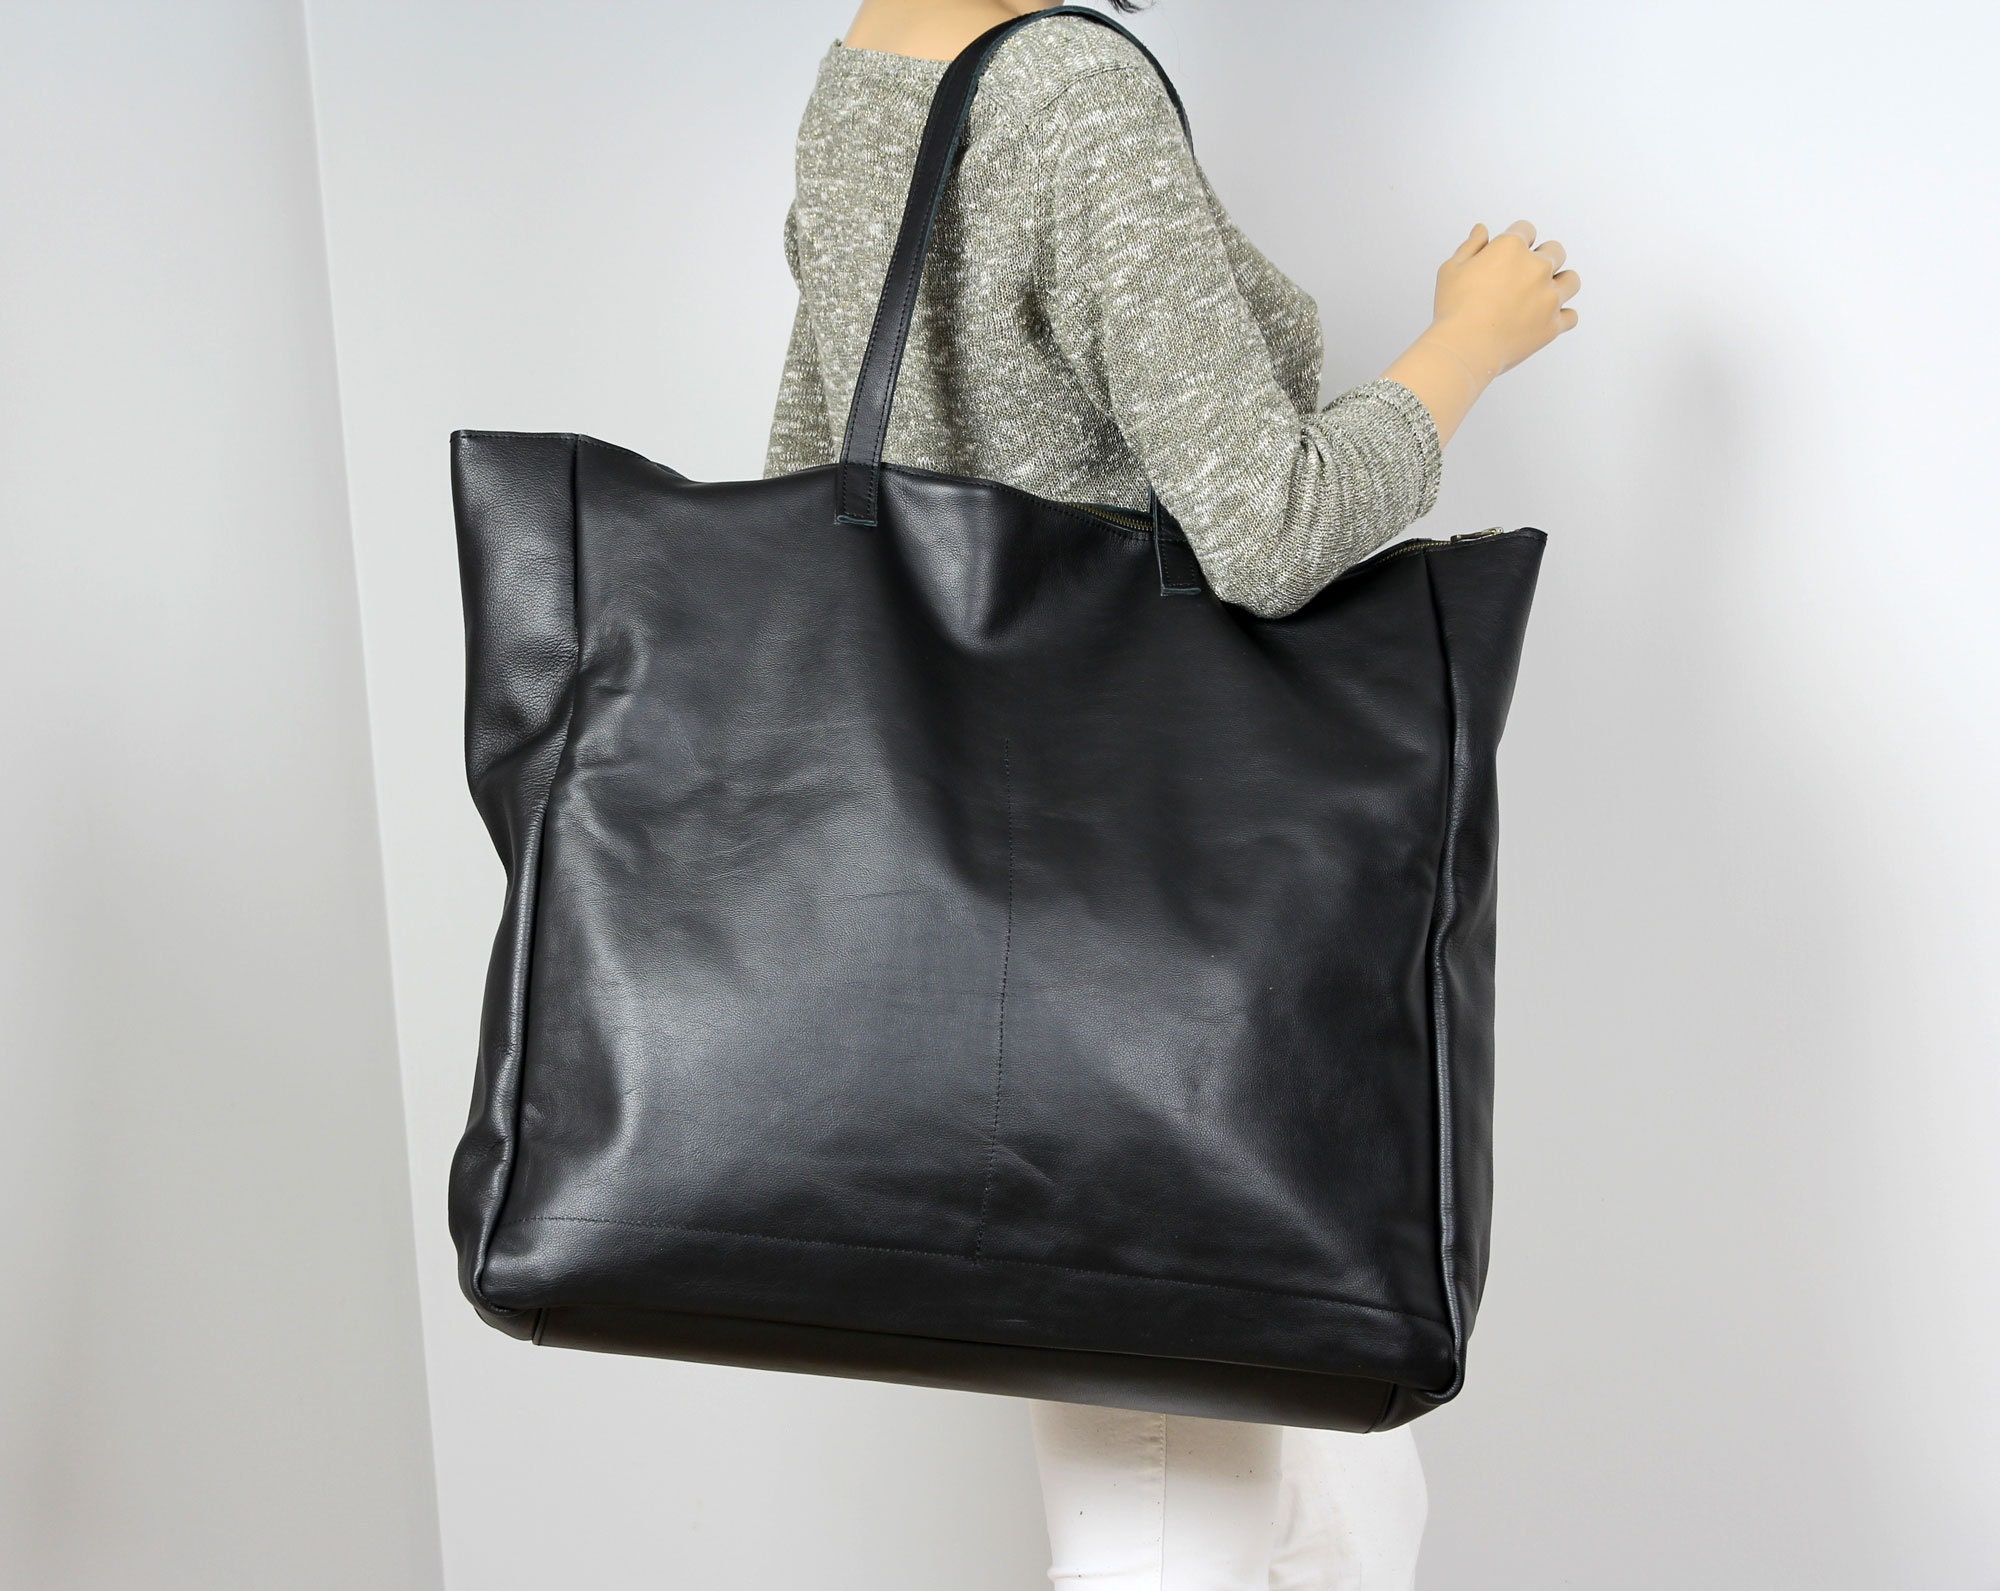 Women's Carryall Tote in Black Very Large Black Zippered - Etsy